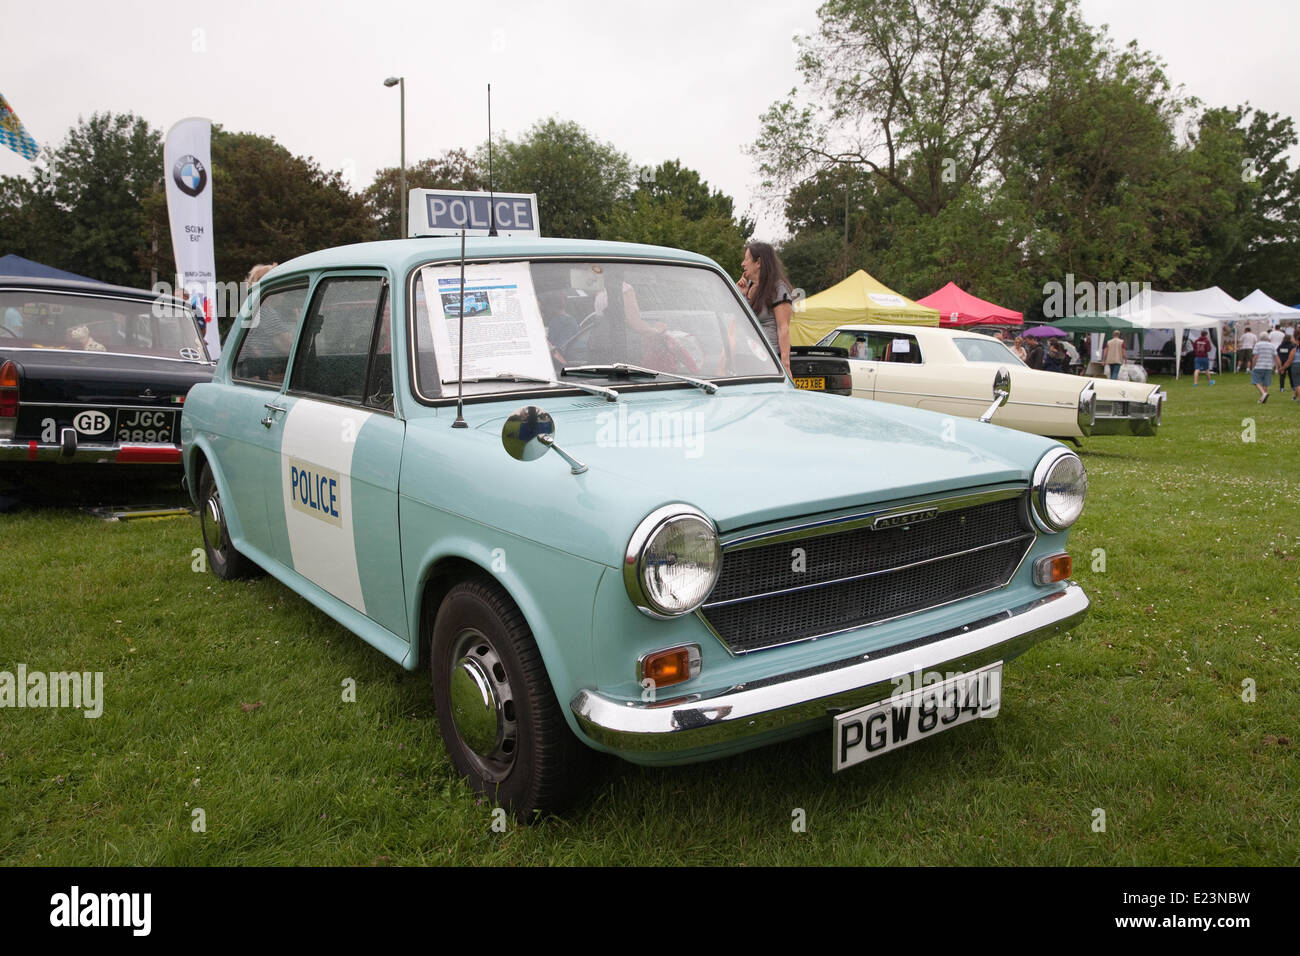 Green St Green,UK,14th June 2014,An Austin 1100 police car on display in Green St Gree Credit: Keith Larby/Alamy Live News Stock Photo